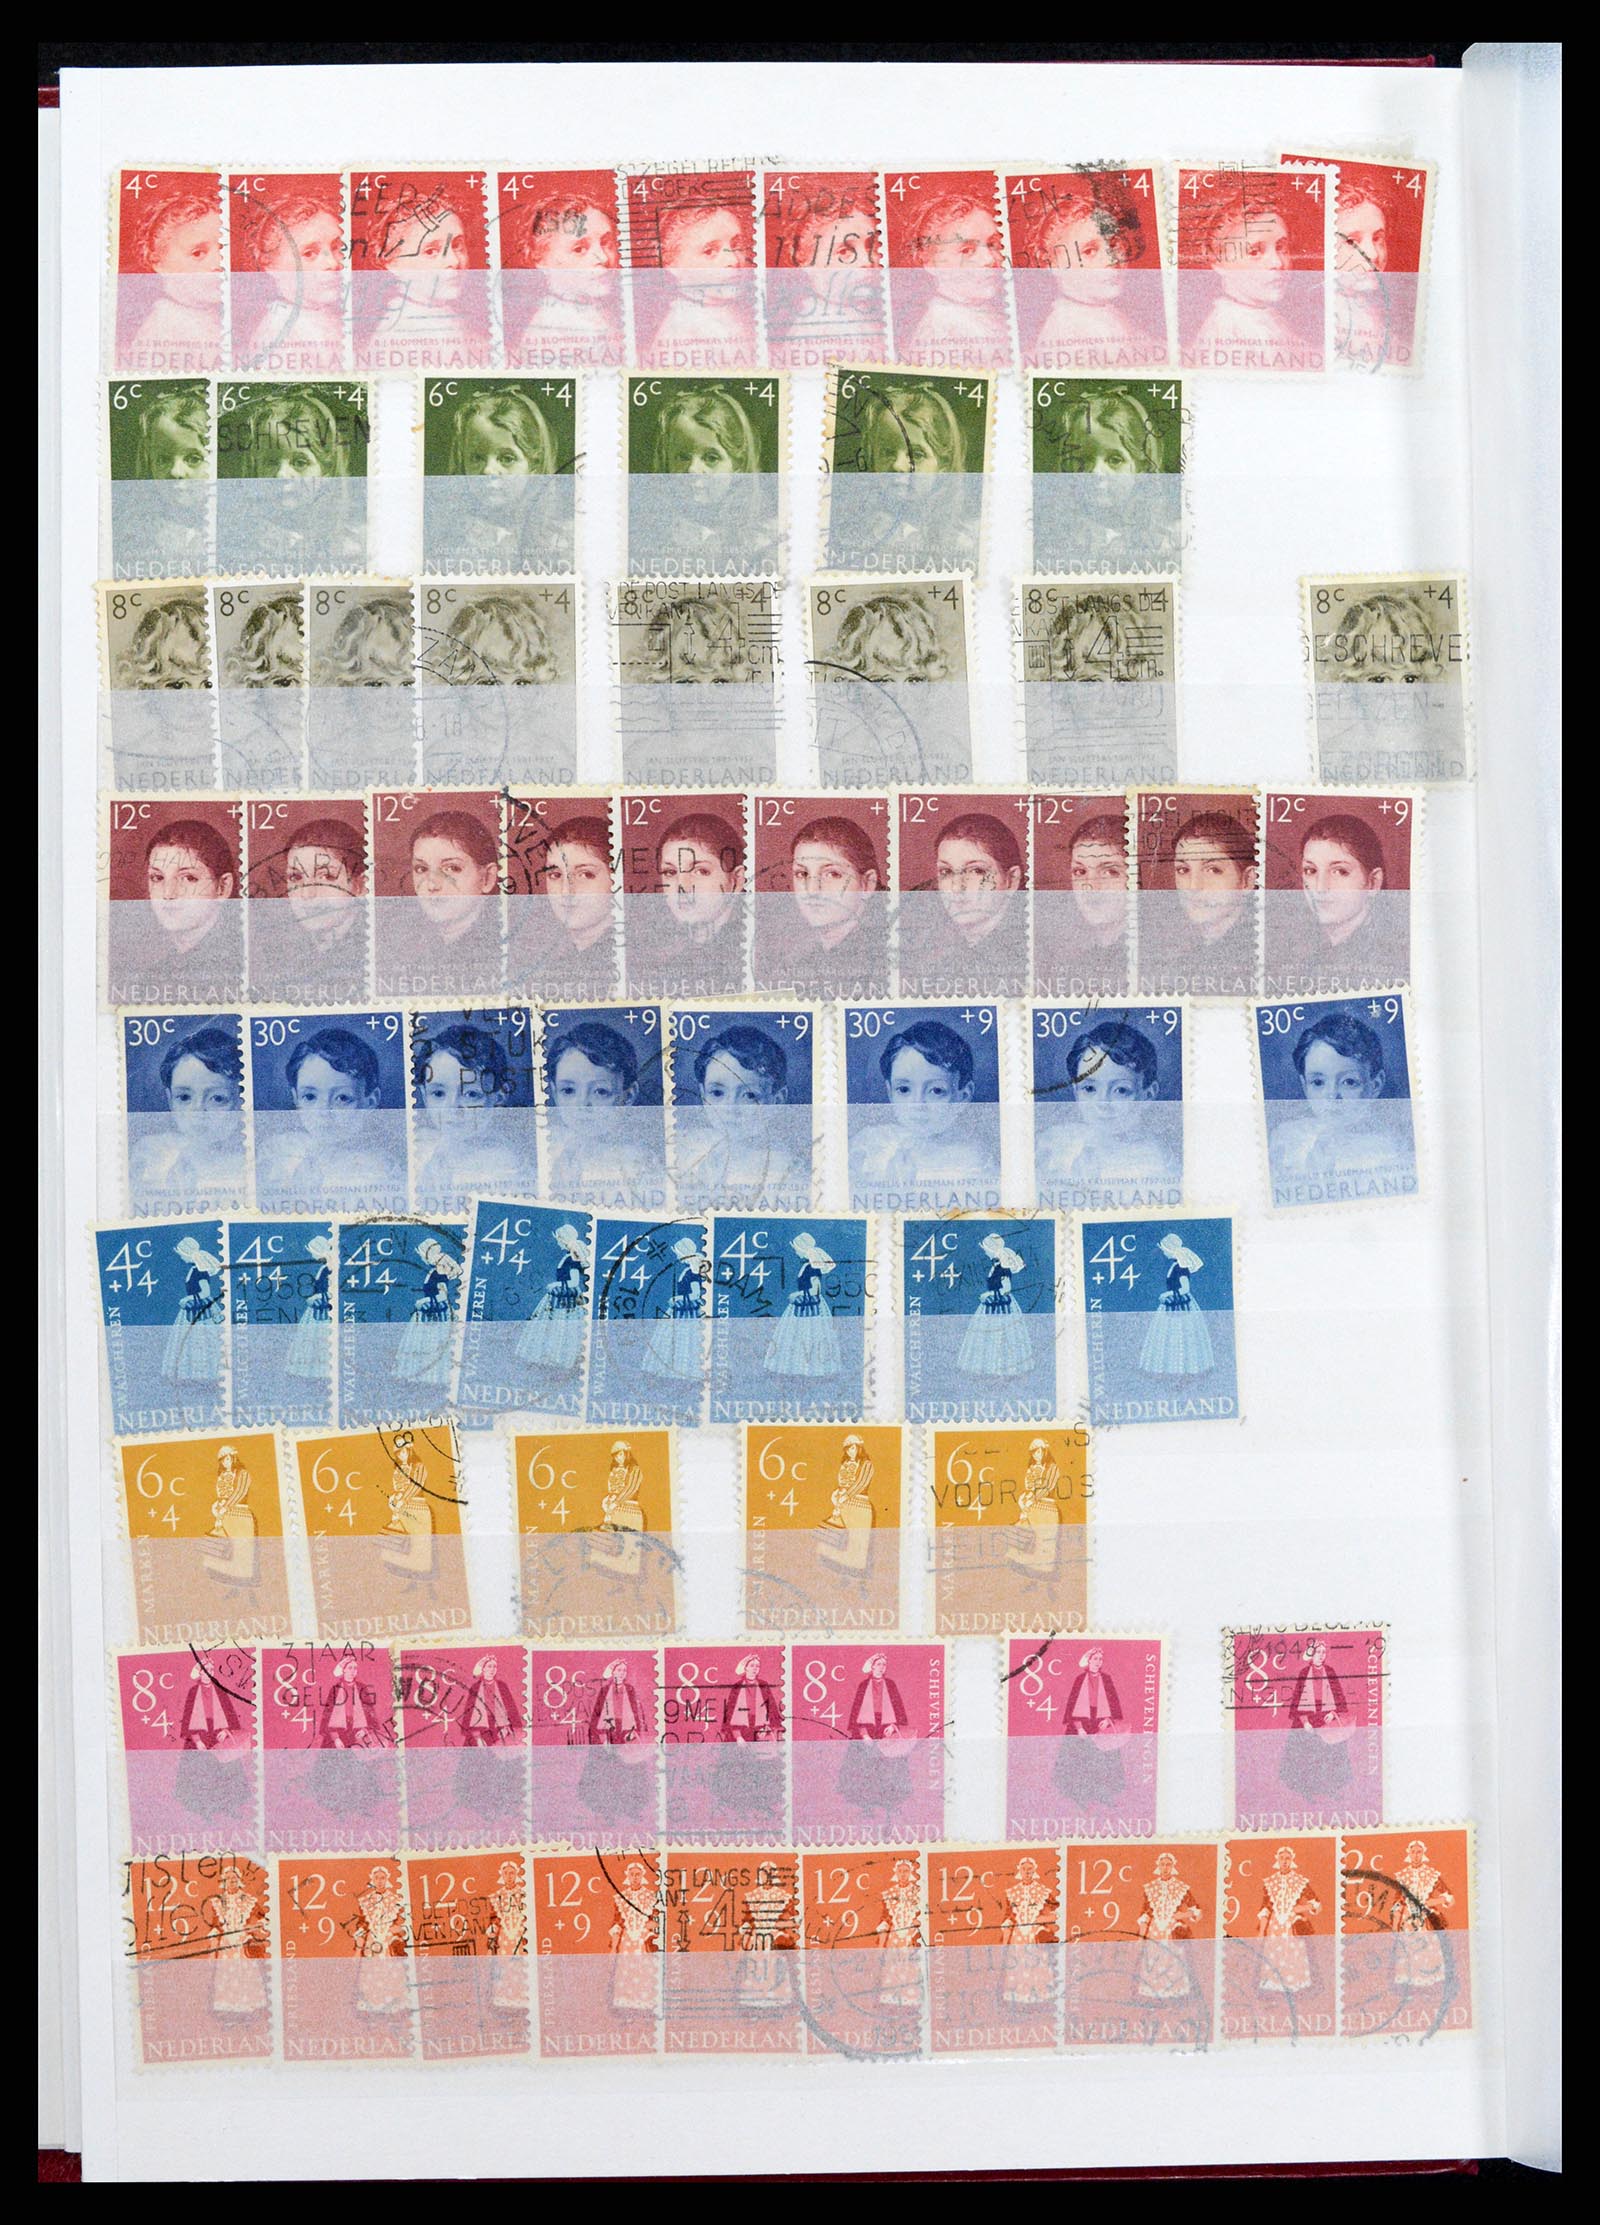 37296 072 - Stamp collection 37296 Netherlands 1852-1981.